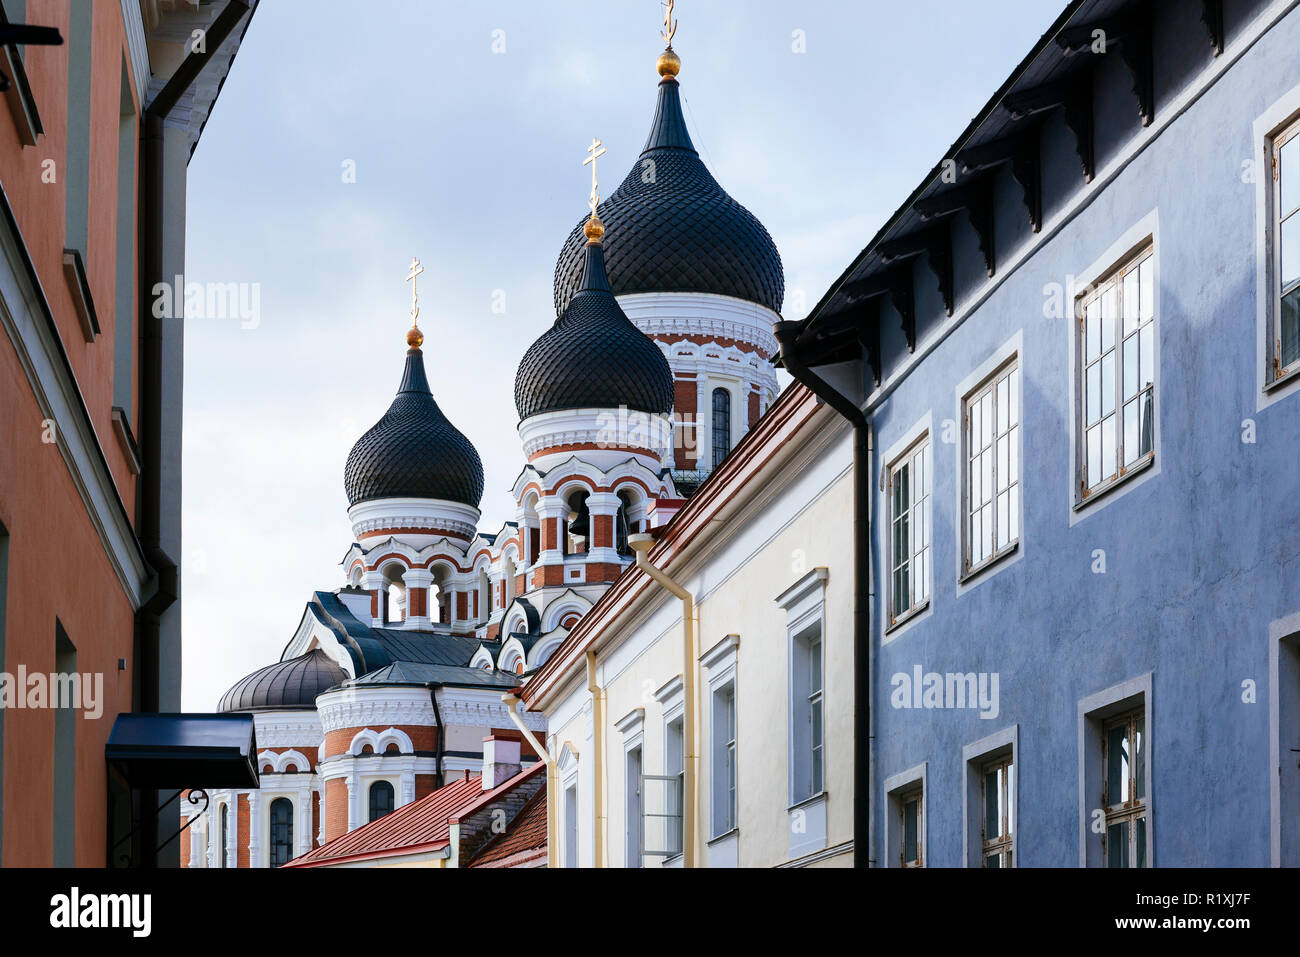 The onion domes of Alexander Nevsky Cathedral peek through the rooftops. Tallinn, Harju County, Estonia, Baltic states, Europe. Stock Photo